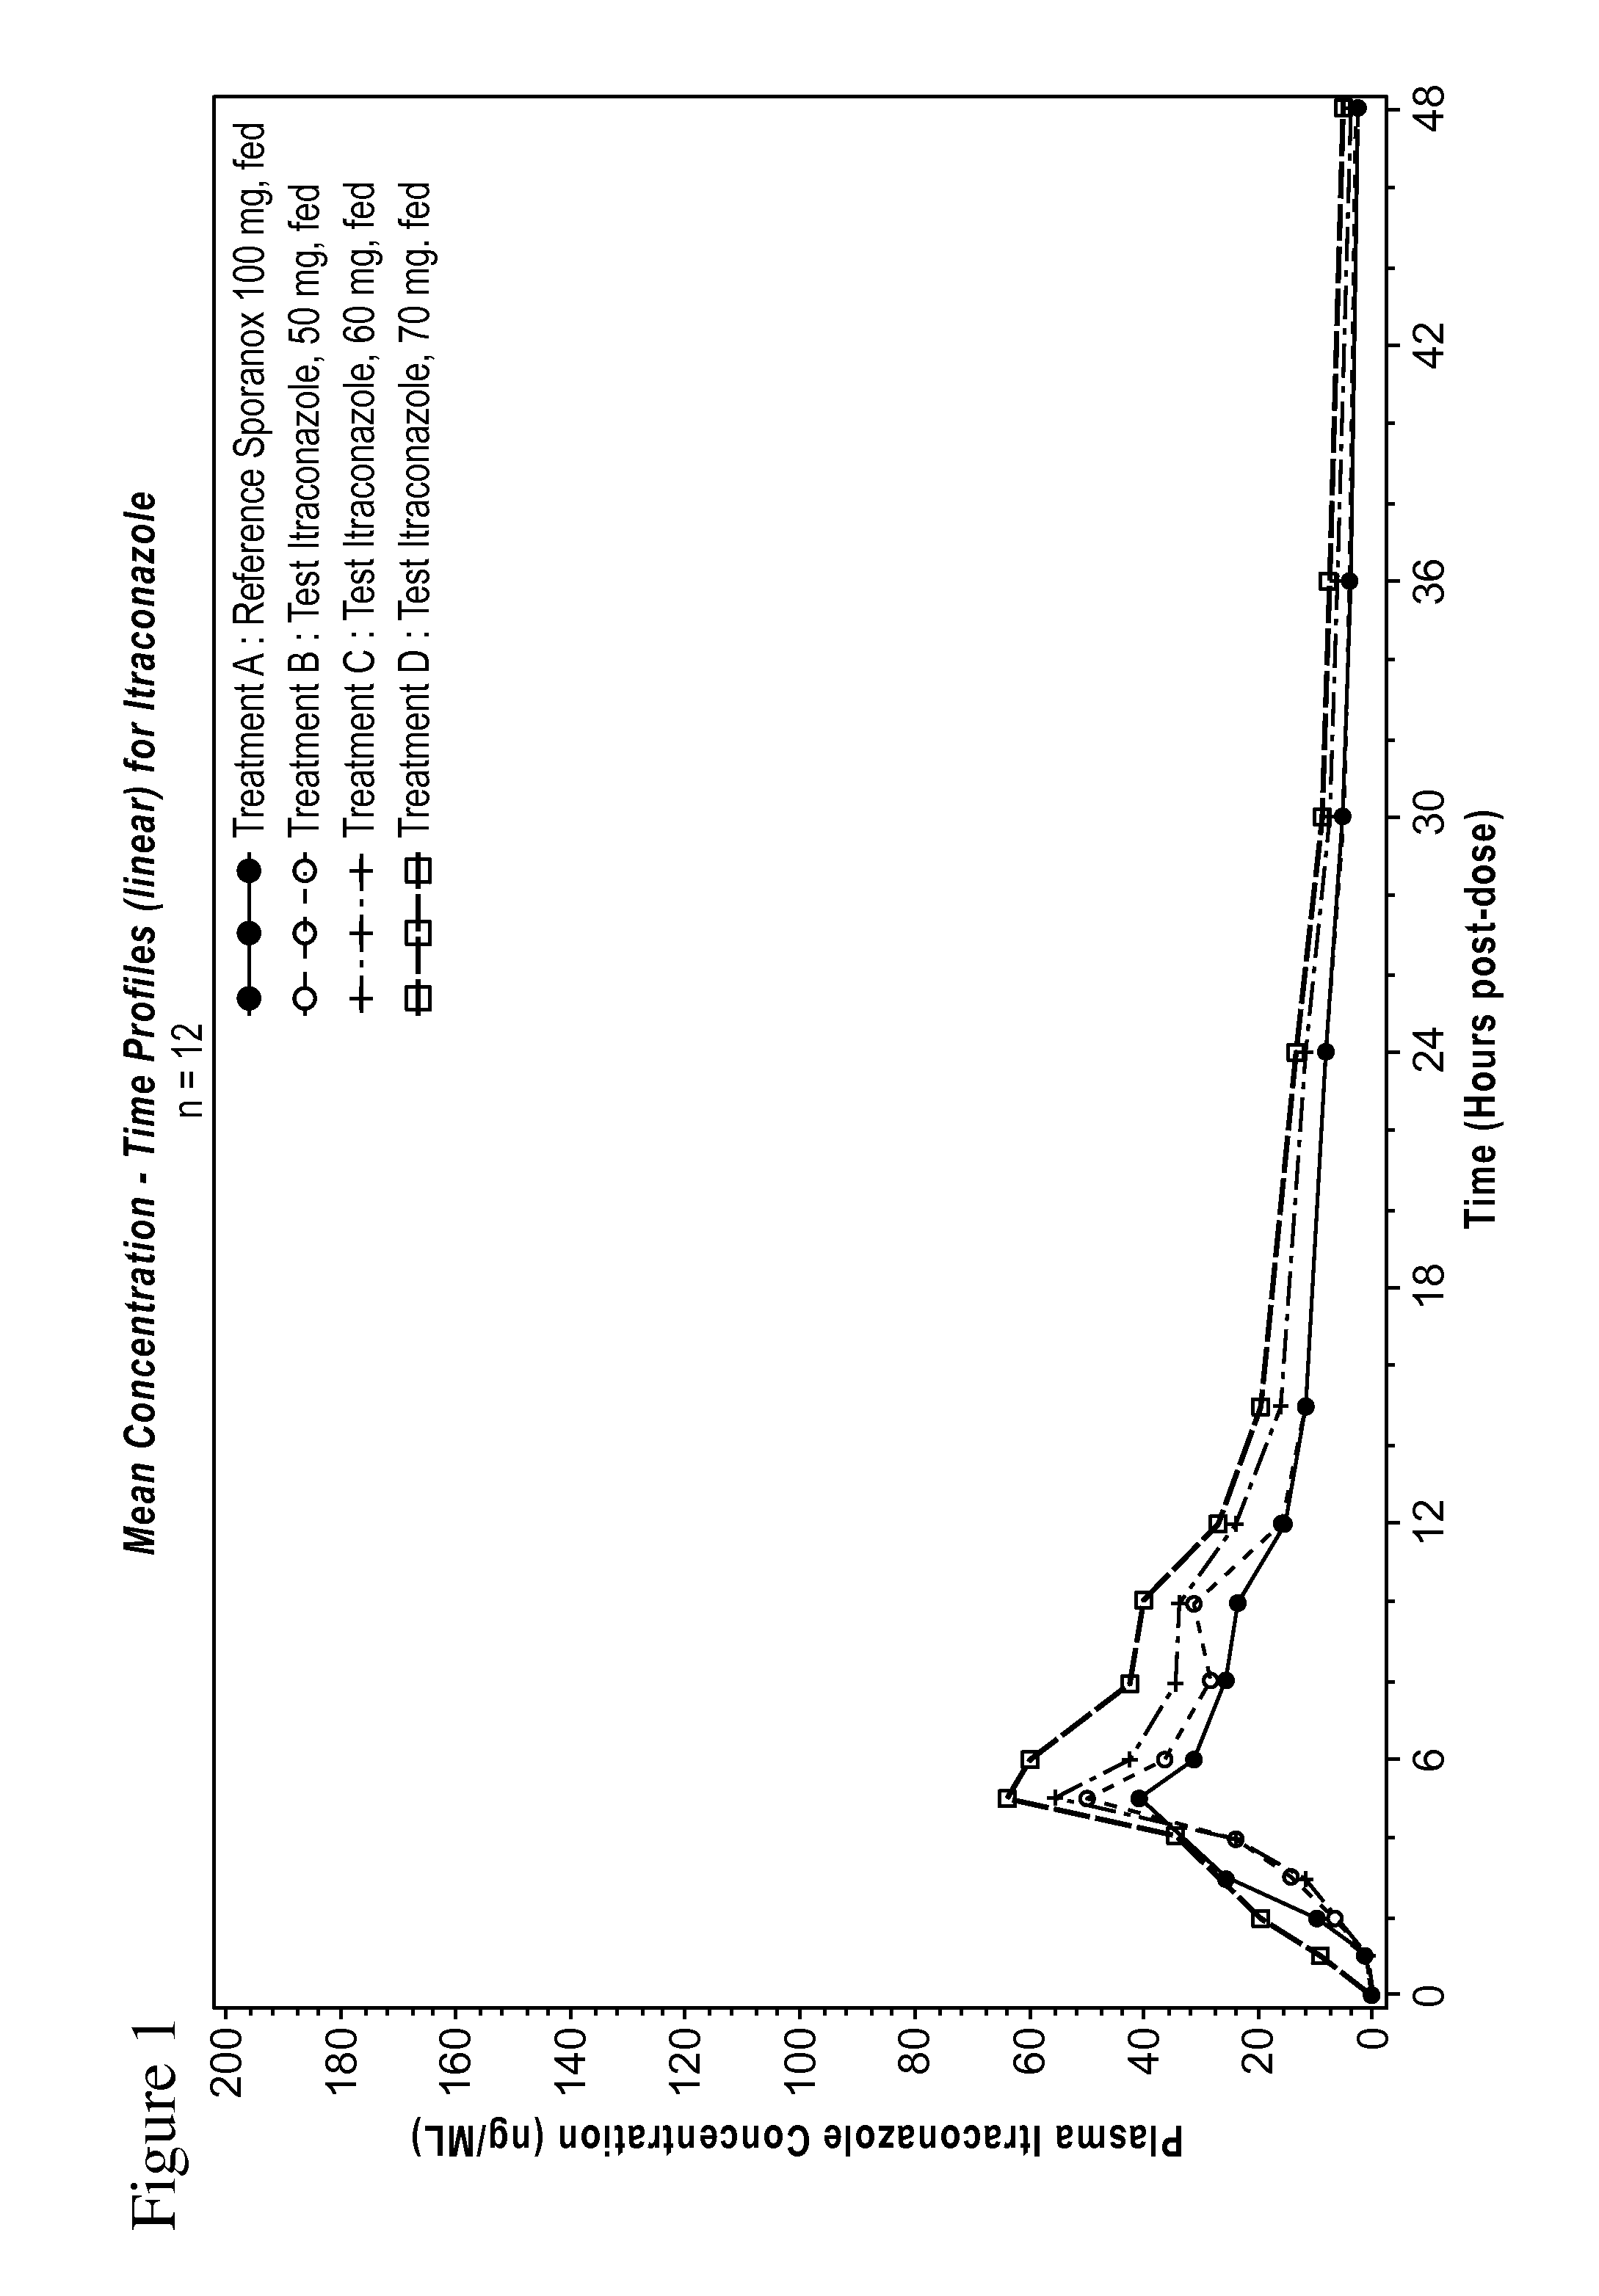 Itraconazole compositions and dosage forms, and methods of using the same